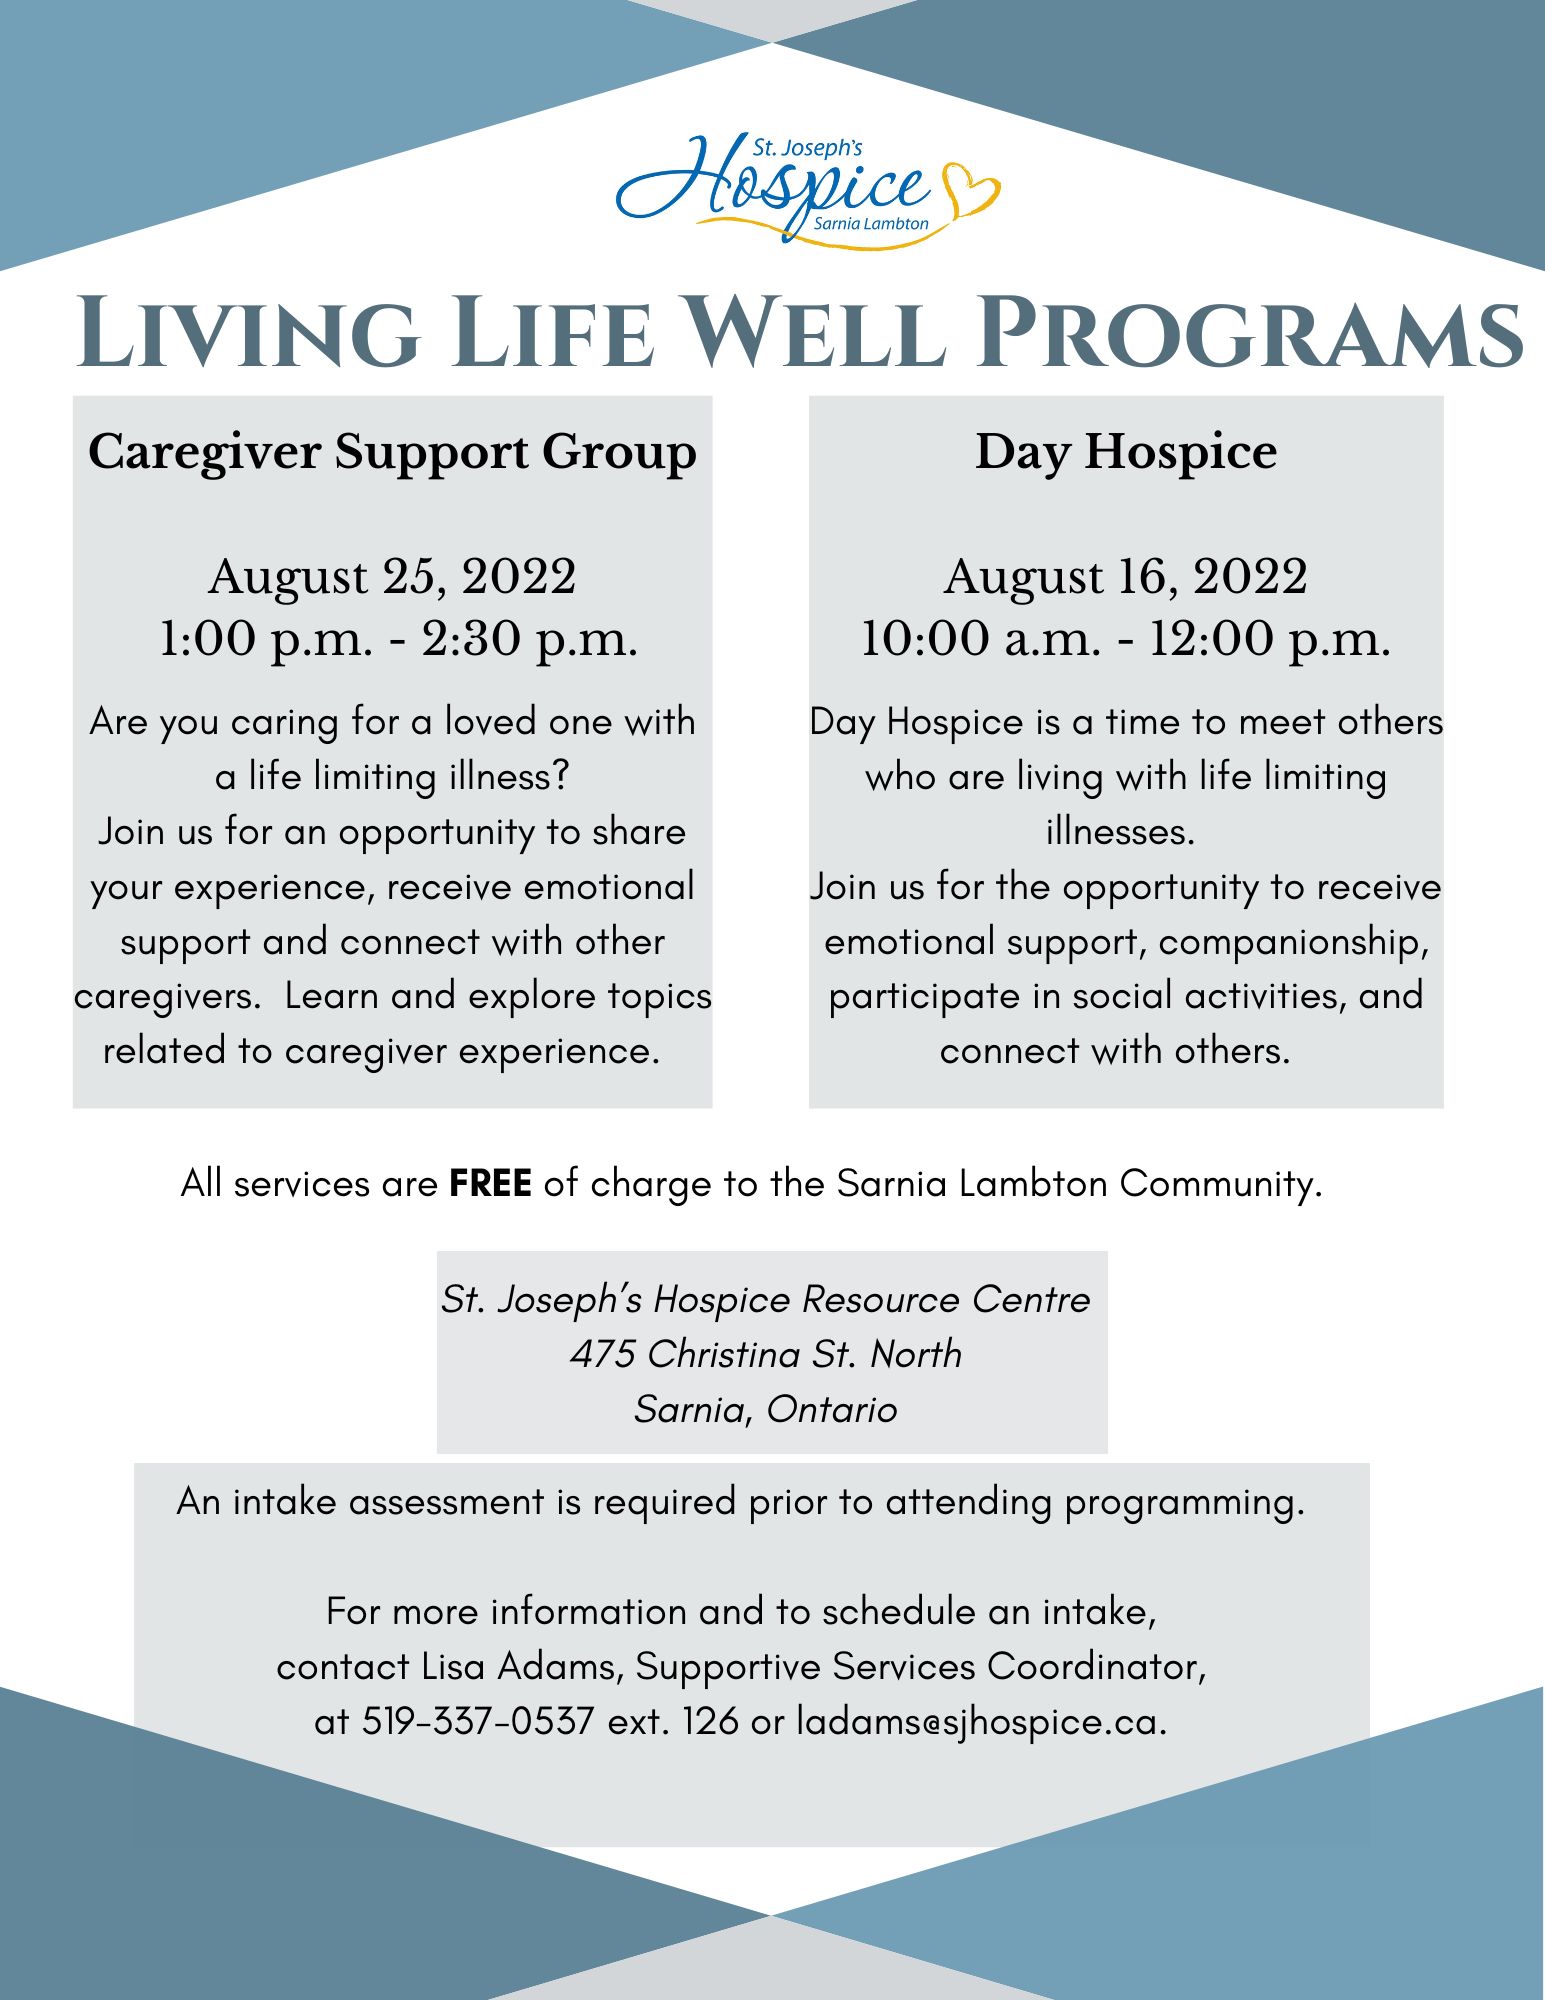 Living Life Well Programs - August 2022